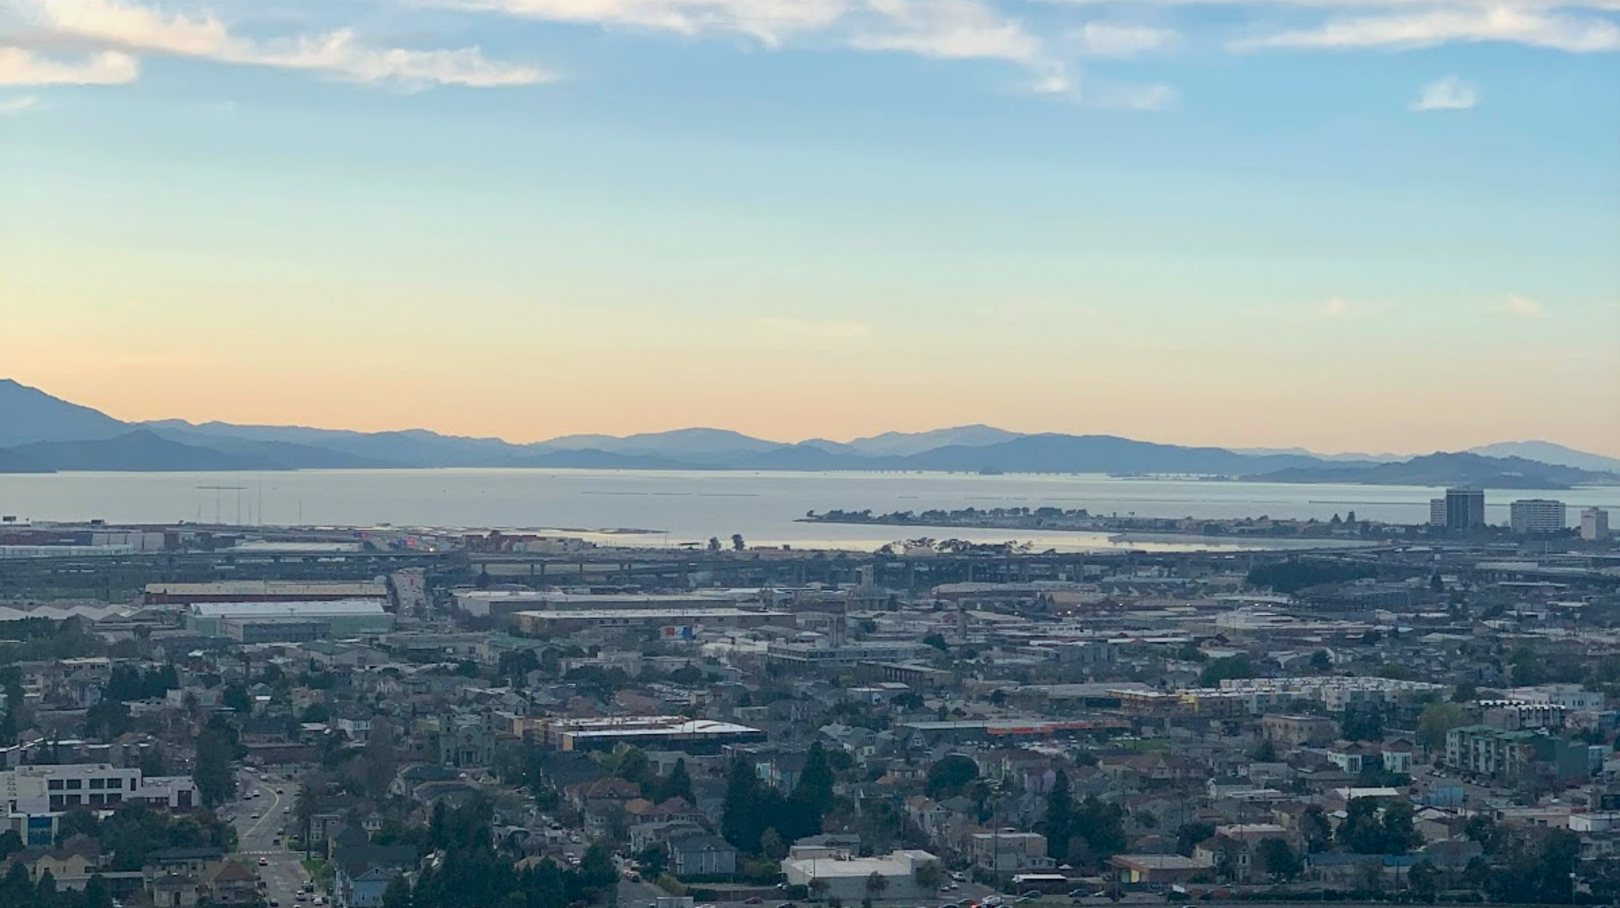 Sunset over West Oakland, Calif., March 30, 2020 (Photo credit: Cliff Worley, Kapor Center)